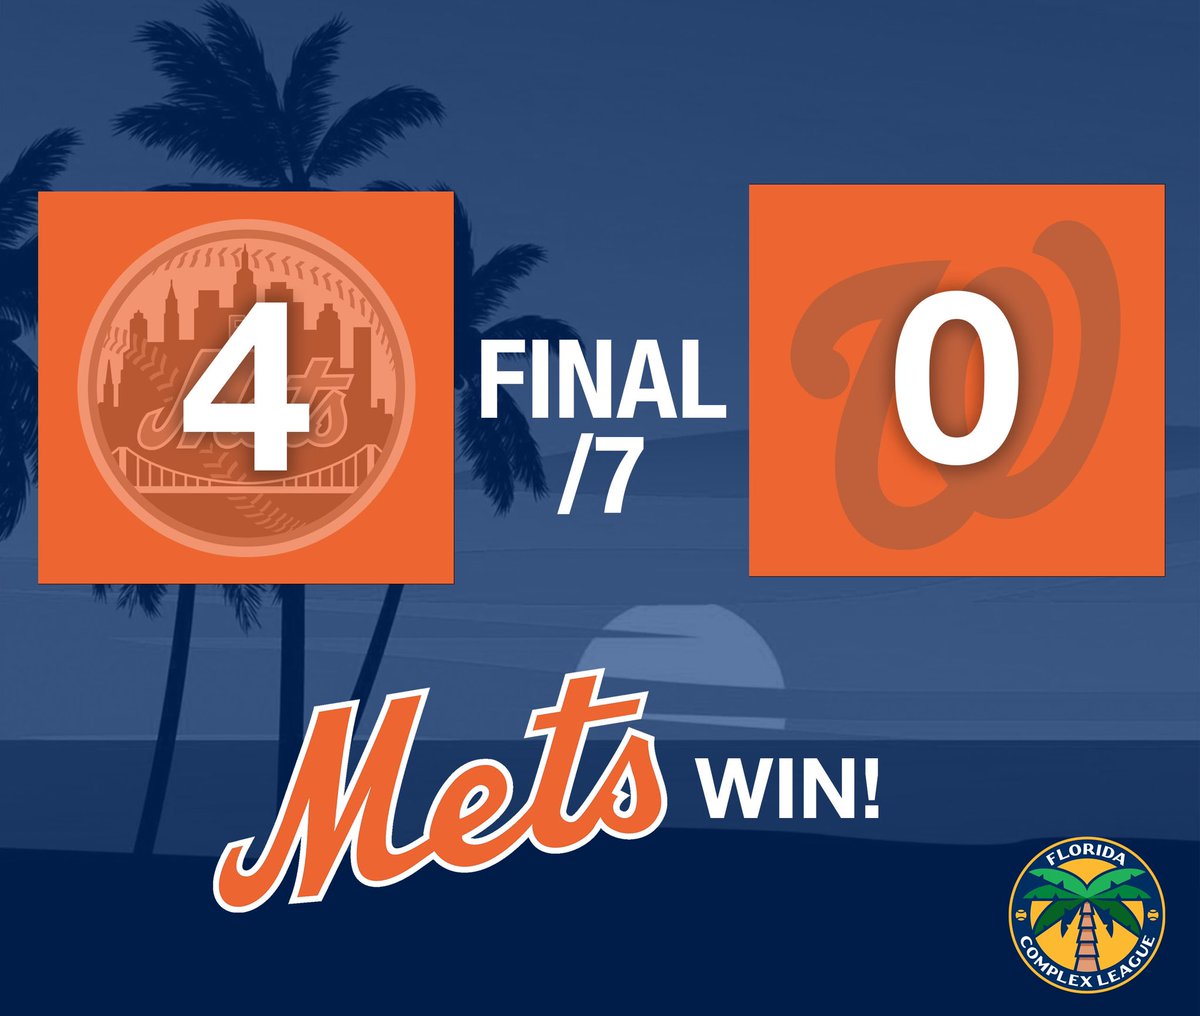 Dominant pitching leads us to our first shutout win of the year!

Nick Morabito: 1-3, BB, R
Jefrey De Los Santos: 1-2, 2 RBI, SB

Ernesto Mercedes: 4 IP, 3 H, 0 R, 3 K
Andinson Ferrer: 3 IP, 1 H, 0 R, 6 K